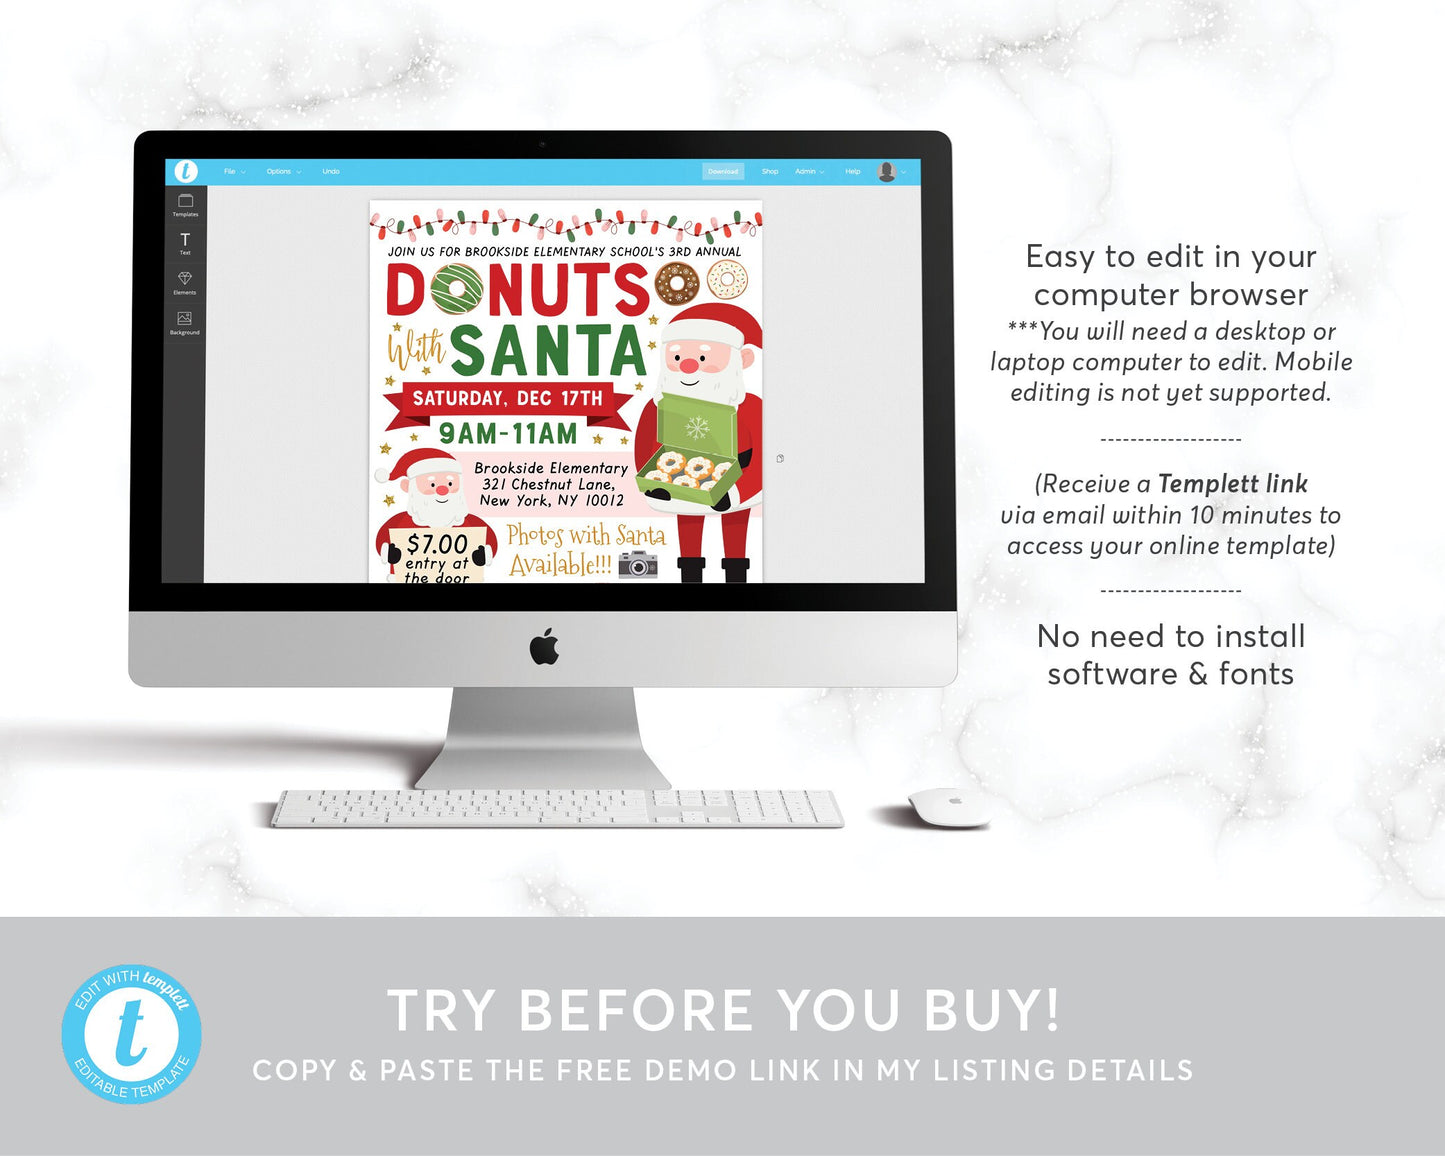 Donuts with Santa Flyer Editable Template, Breakfast with Santa Invitation, Kids Christmas Party Holiday Invite, Community School Fundraiser